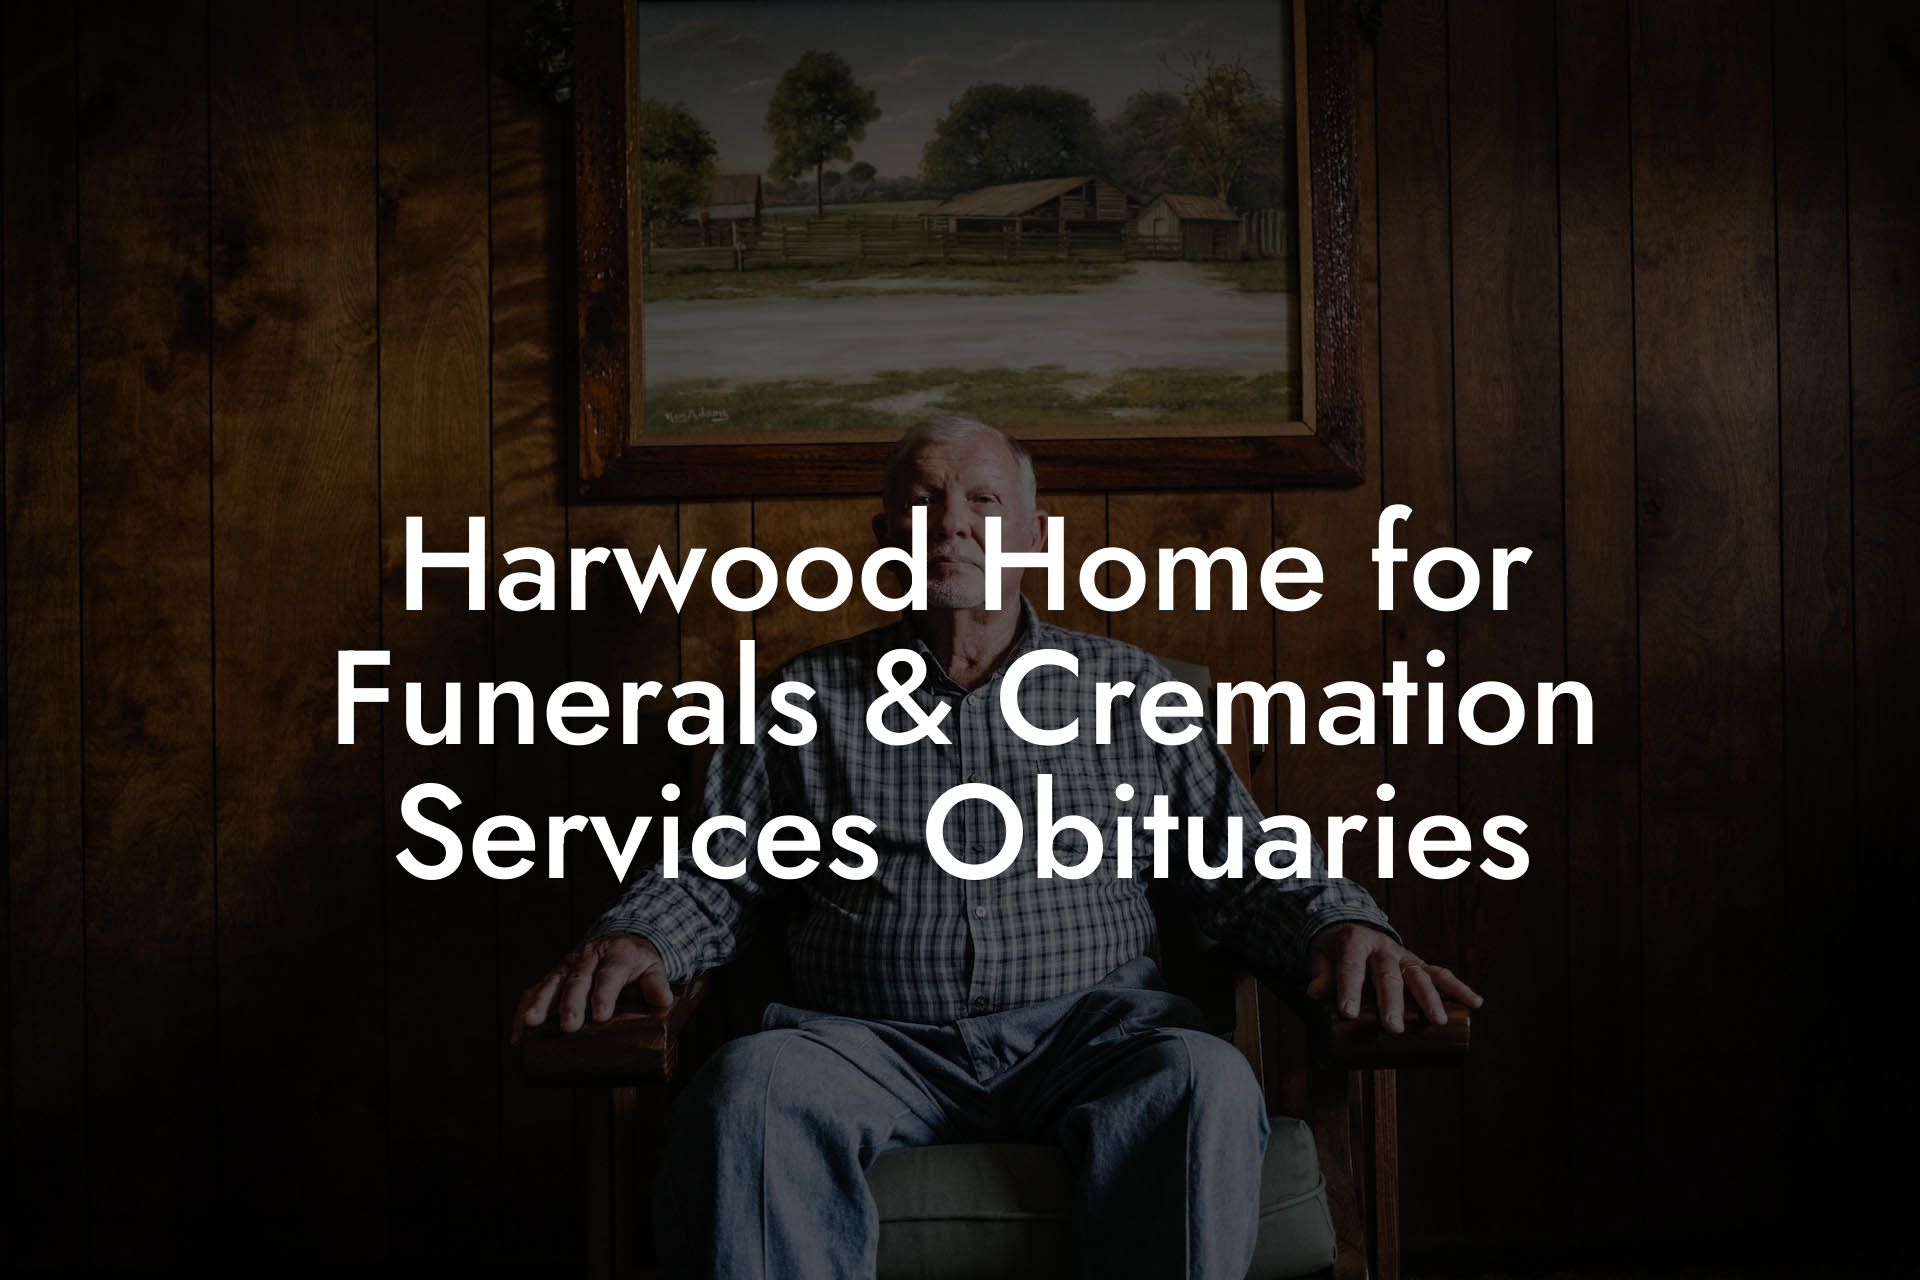 Harwood Home for Funerals & Cremation Services Obituaries